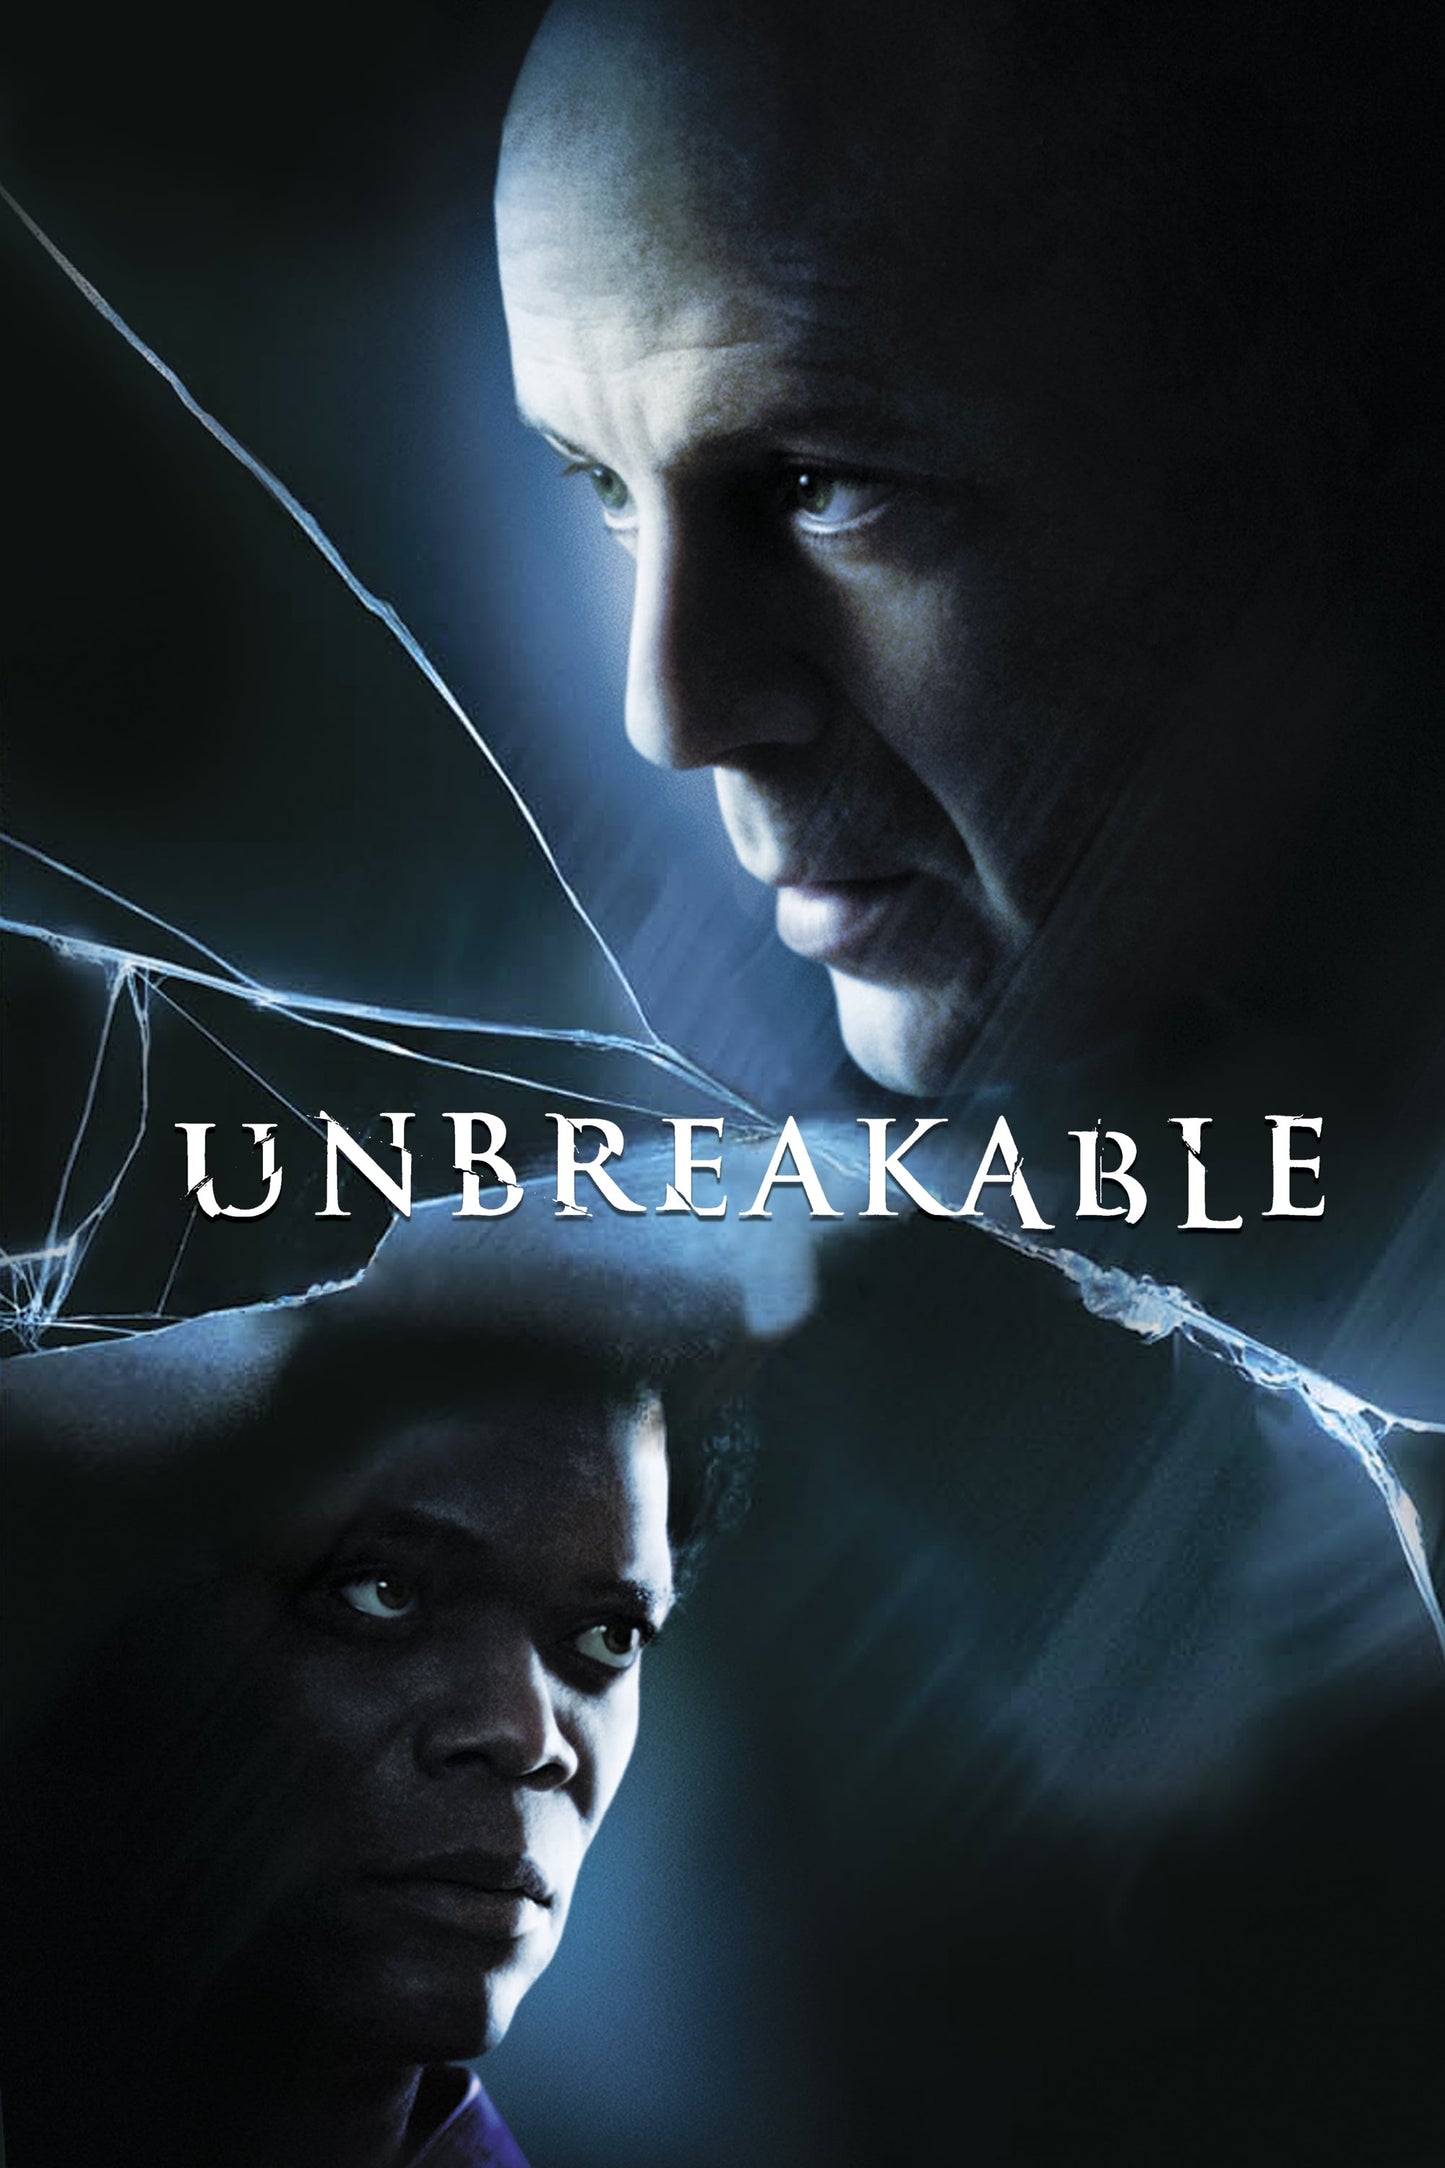 Unbreakable VHS (2000)